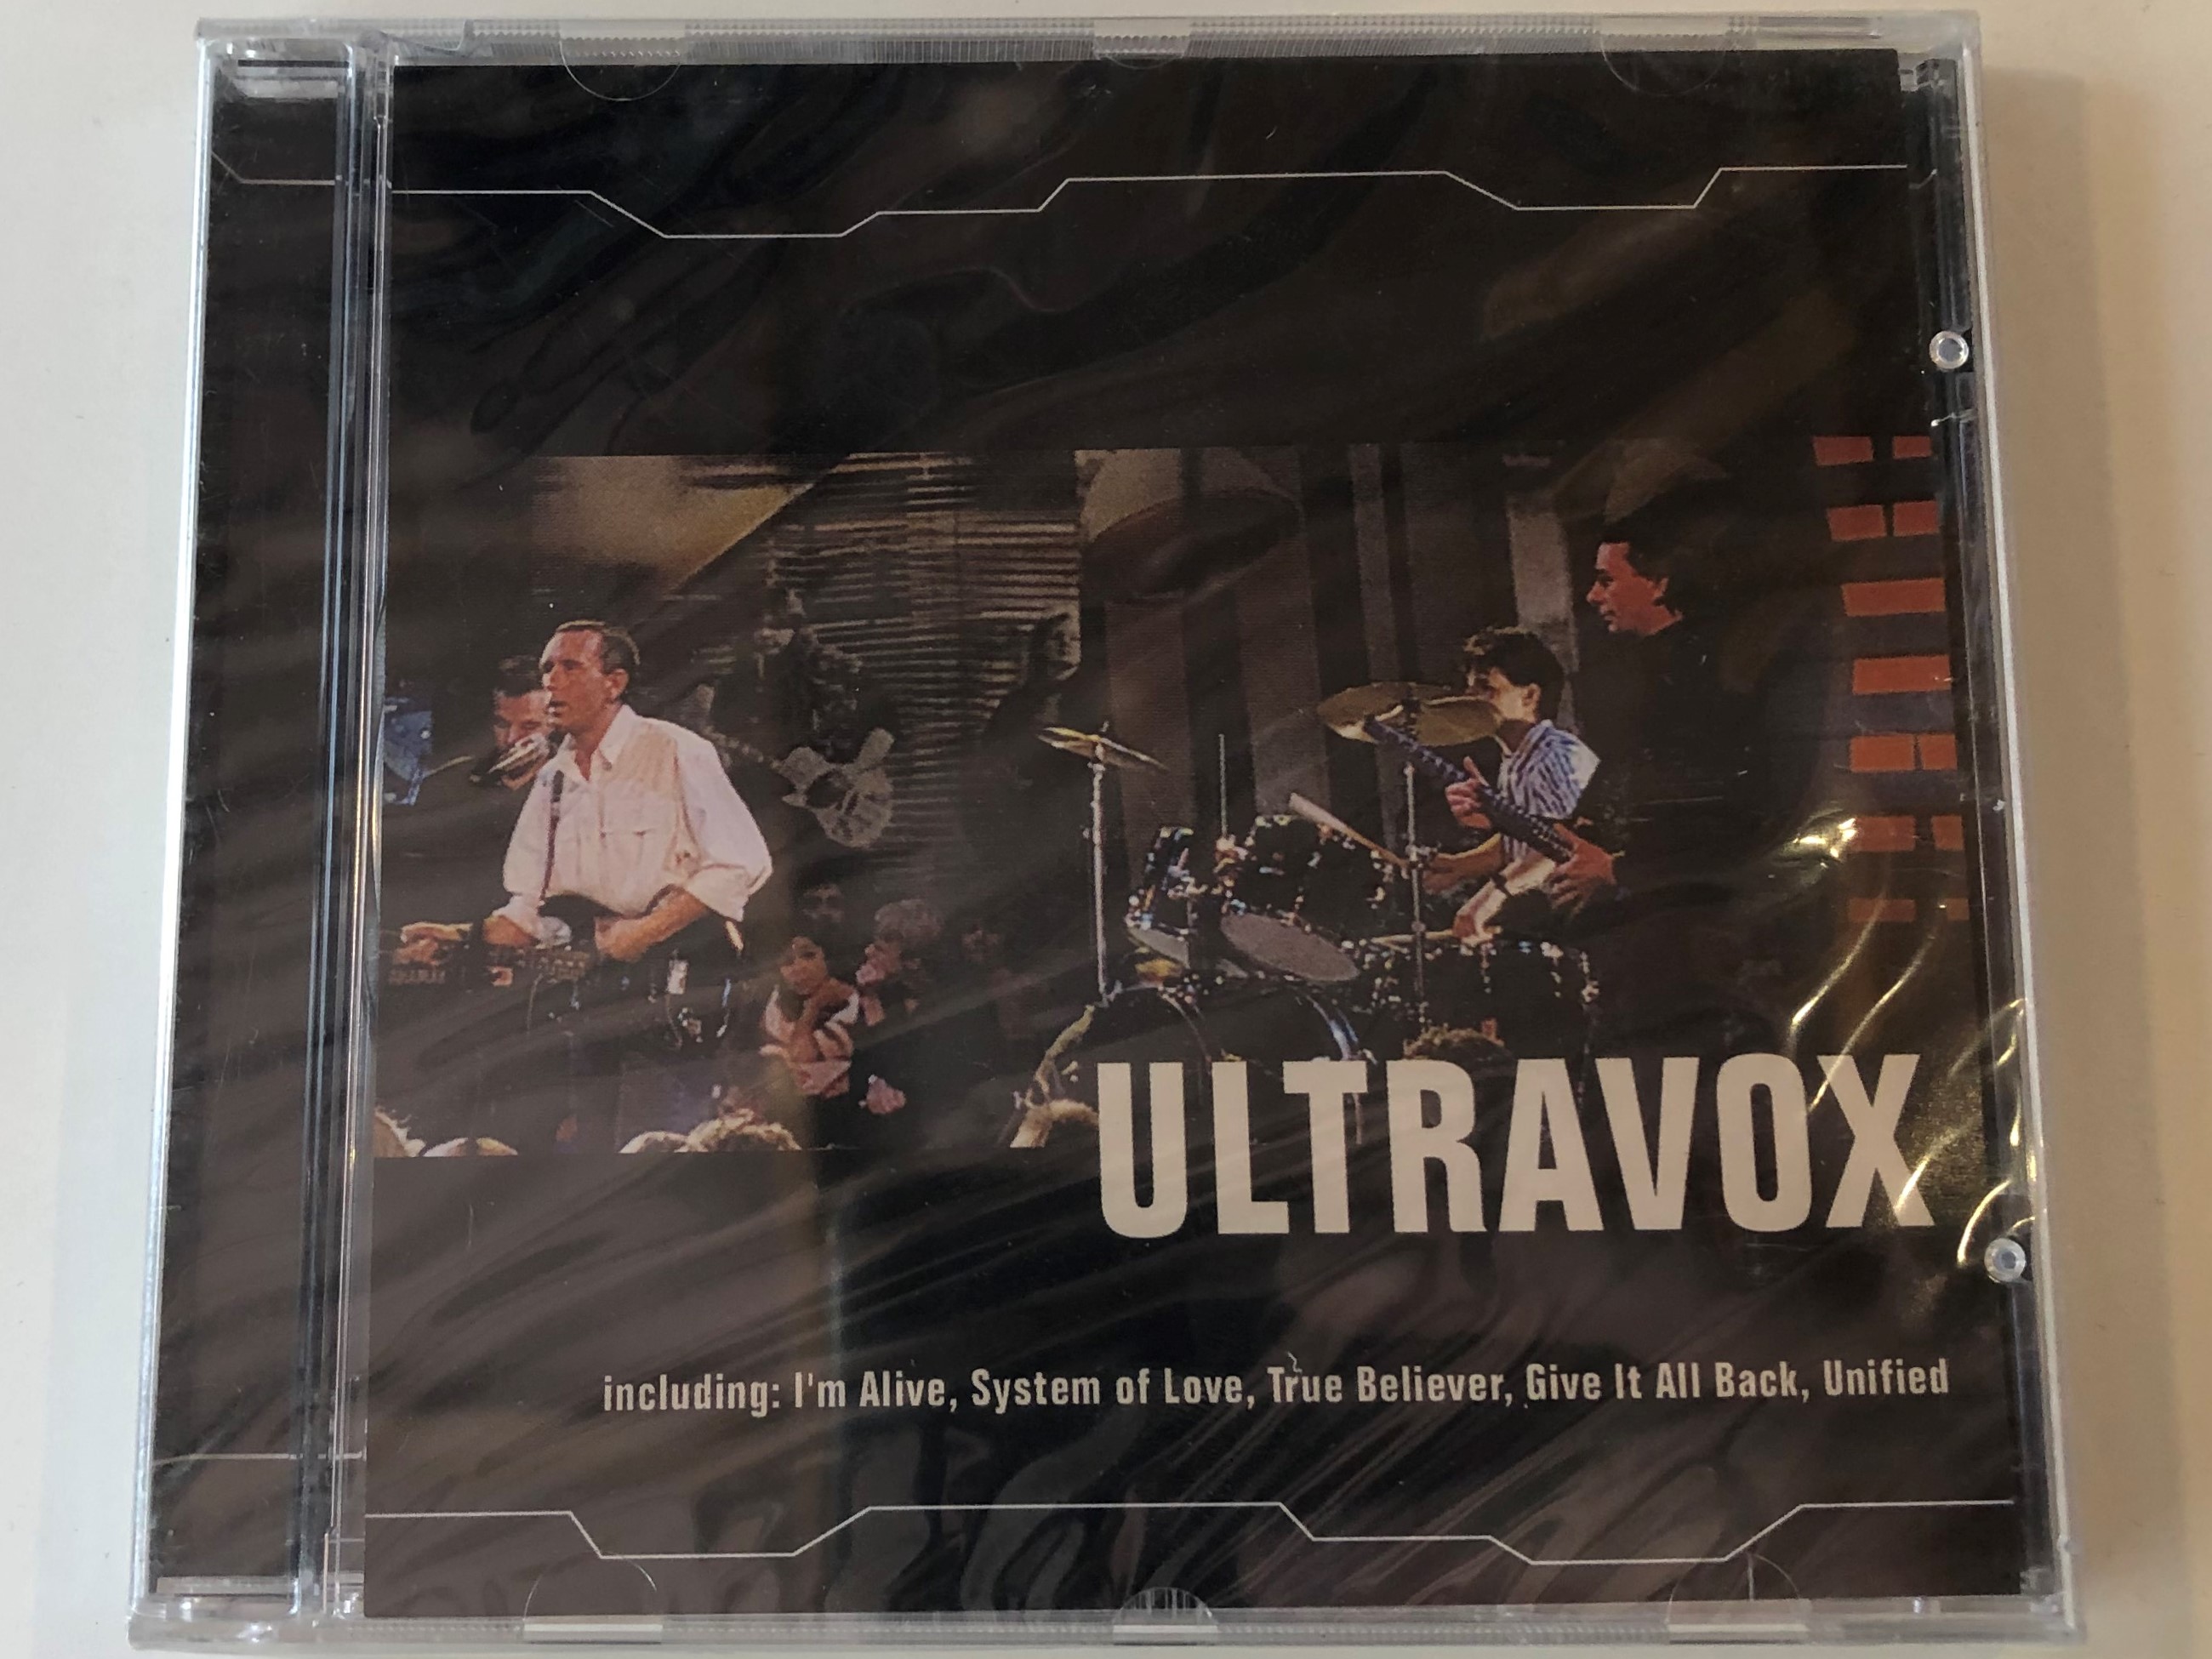 ultravox-including-i-m-alive-system-of-love-true-believer-give-it-all-back-unified-falcon-neue-medien-audio-cd-2001-3938-1-.jpg